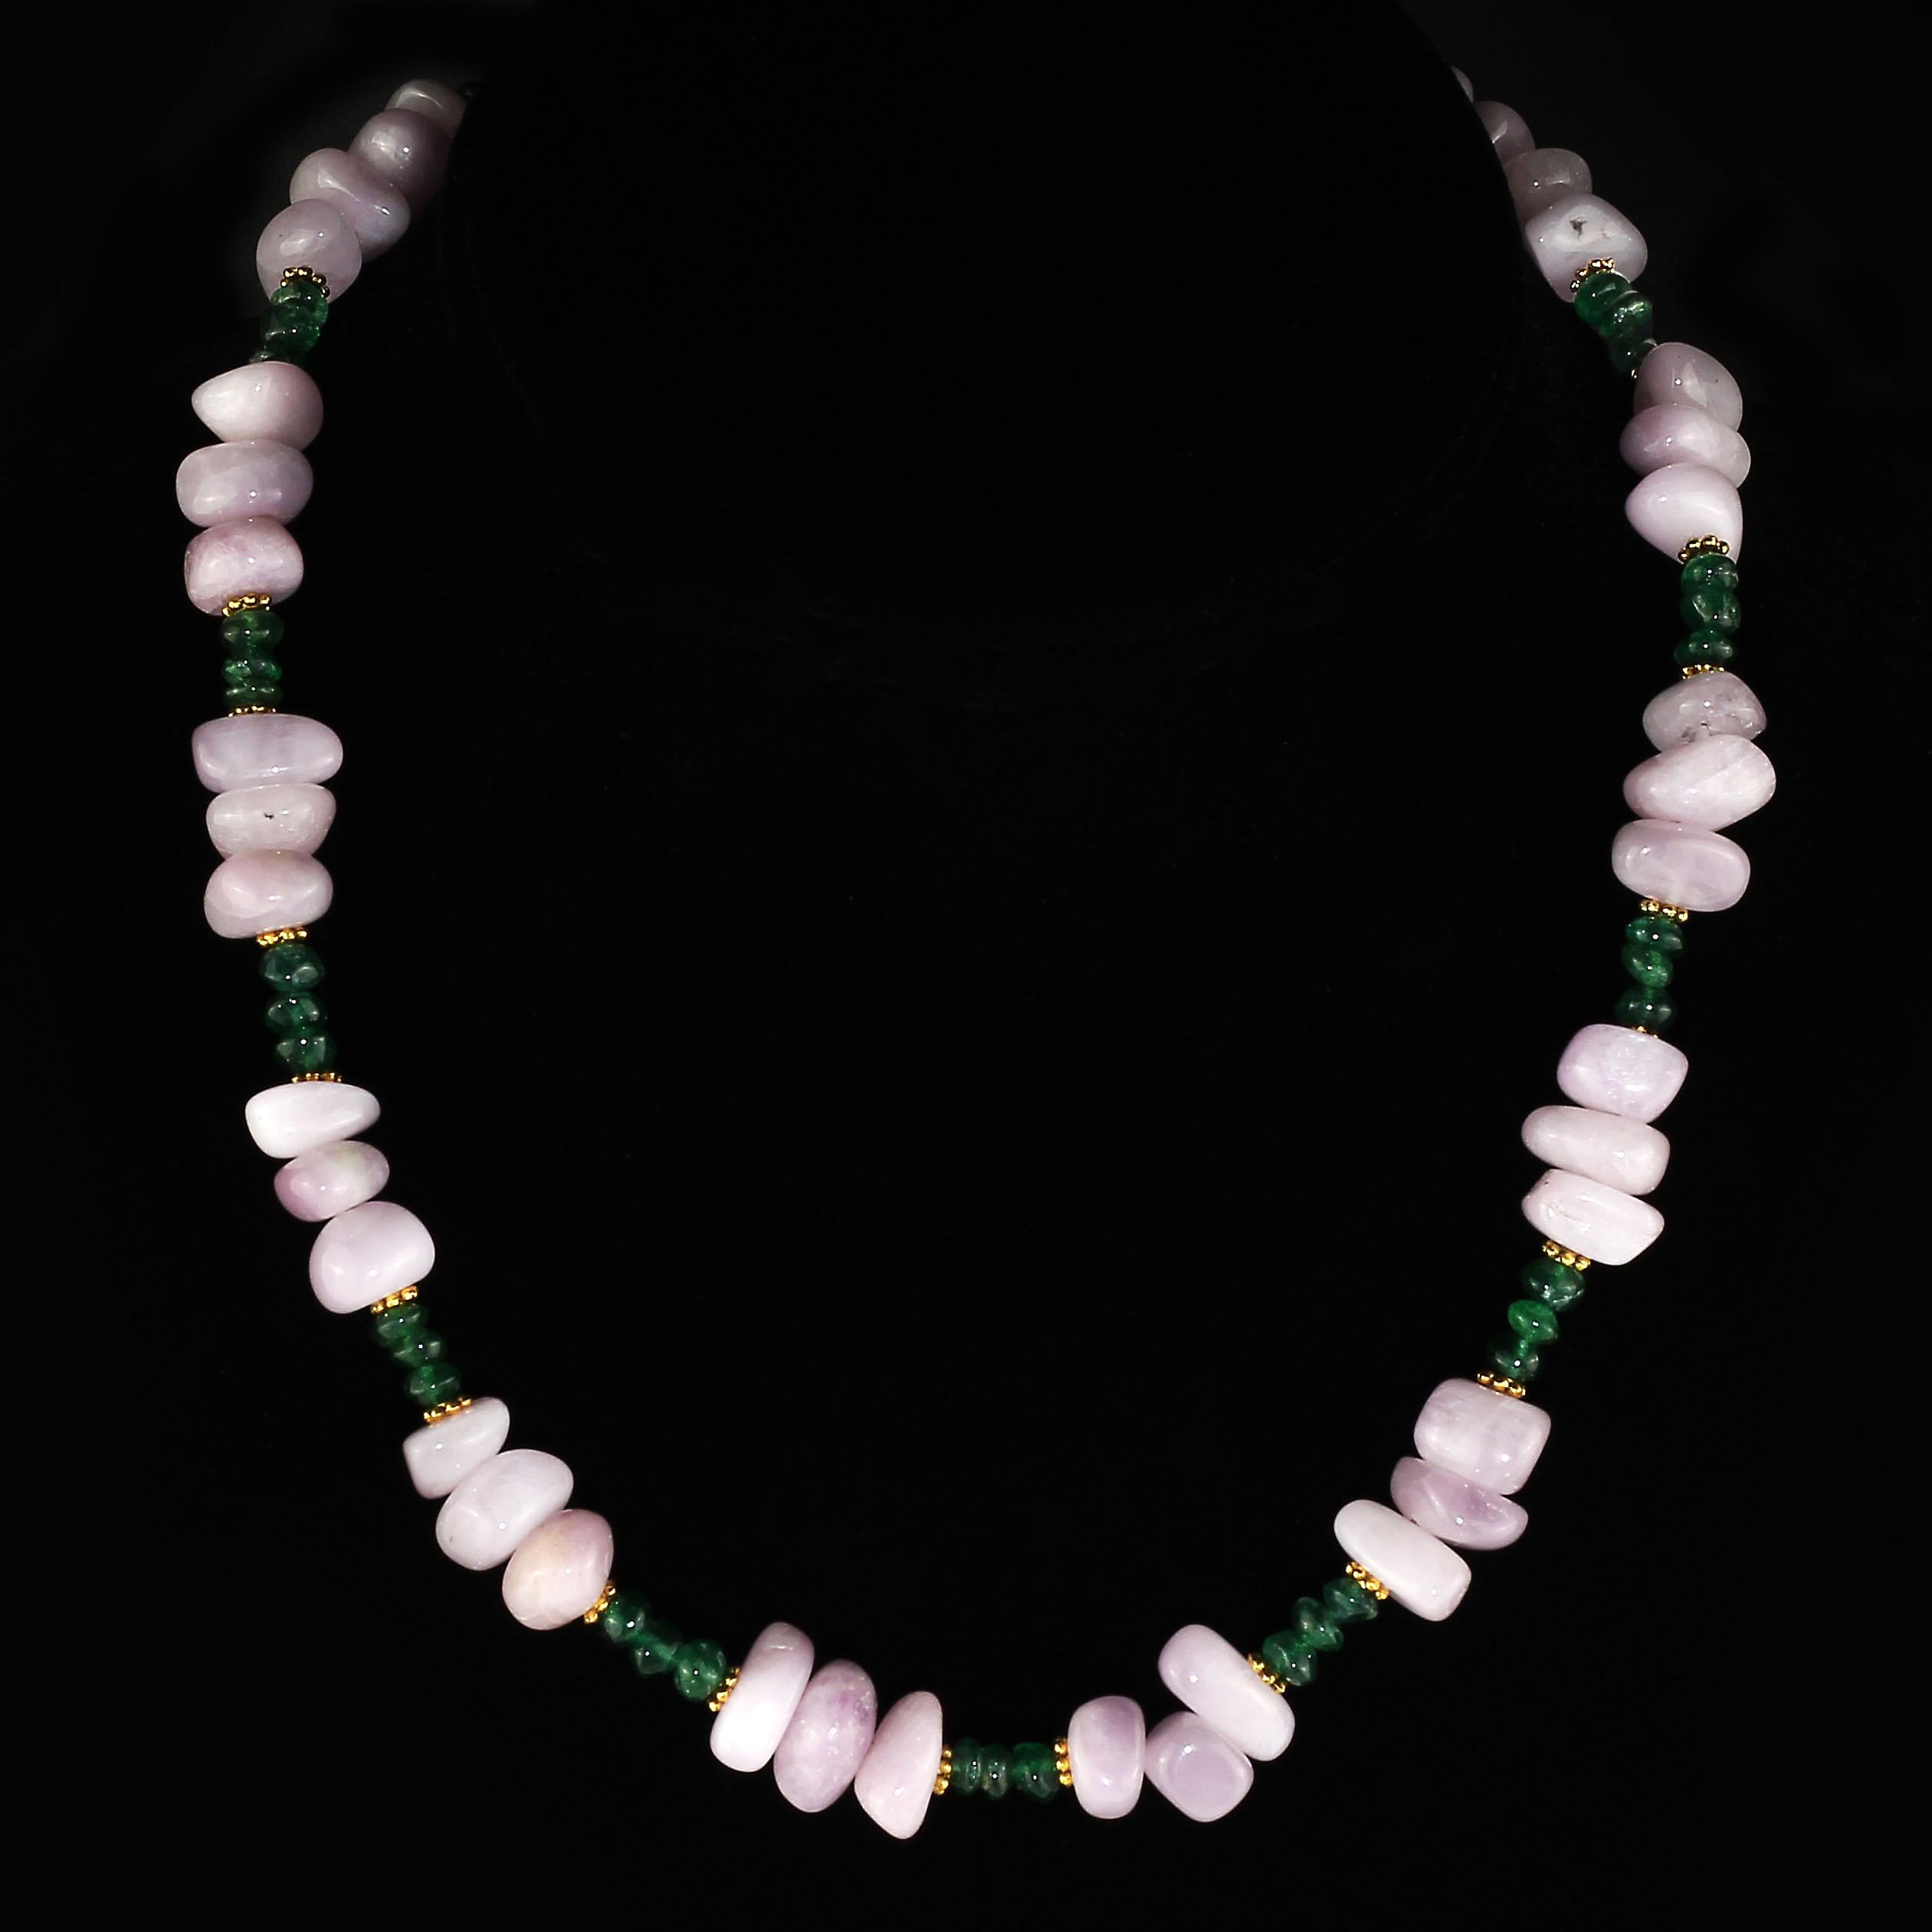 Women's or Men's AJD Glowing Kunzite and Aventurine Necklace for Summer Fun For Sale